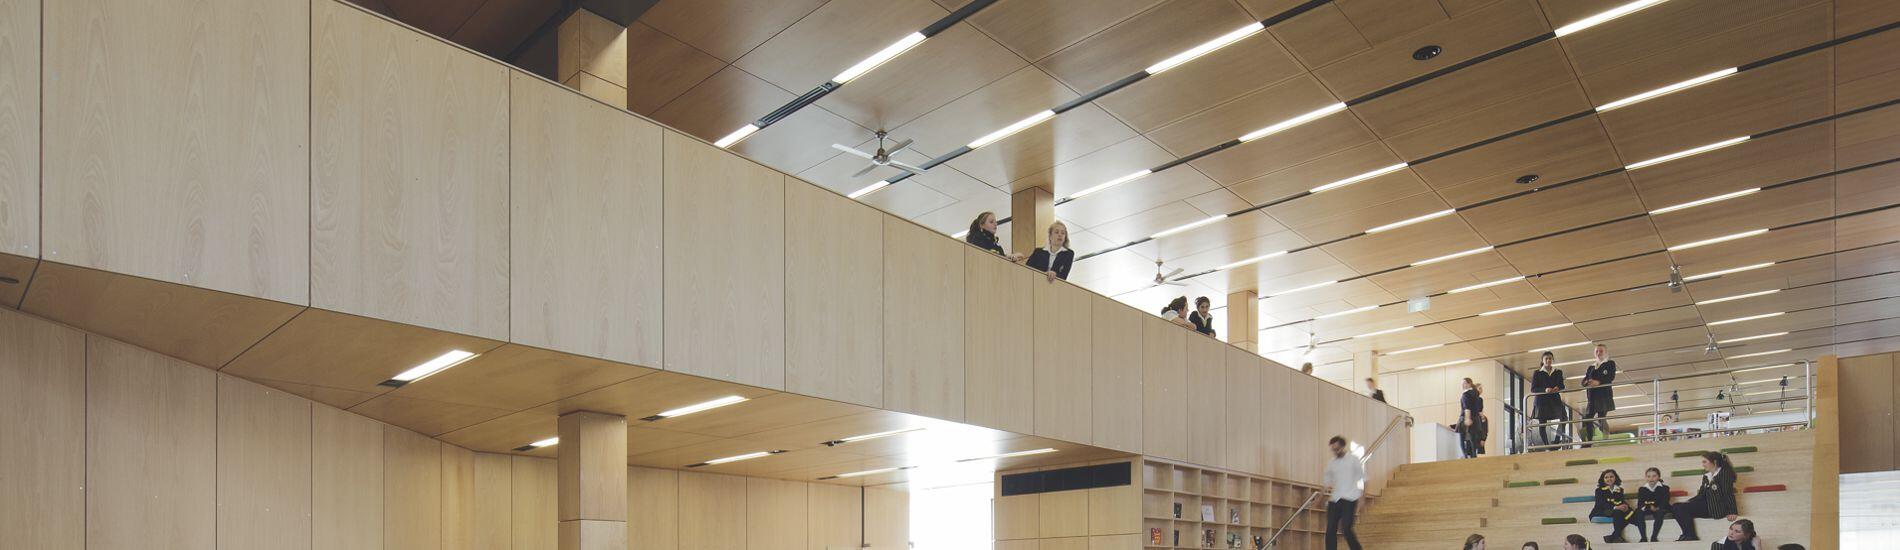 SUPACOUSTIC Acoustic Perforated Ceiling Panels Solve Noise Reverberation Issues in Award Winning School Building